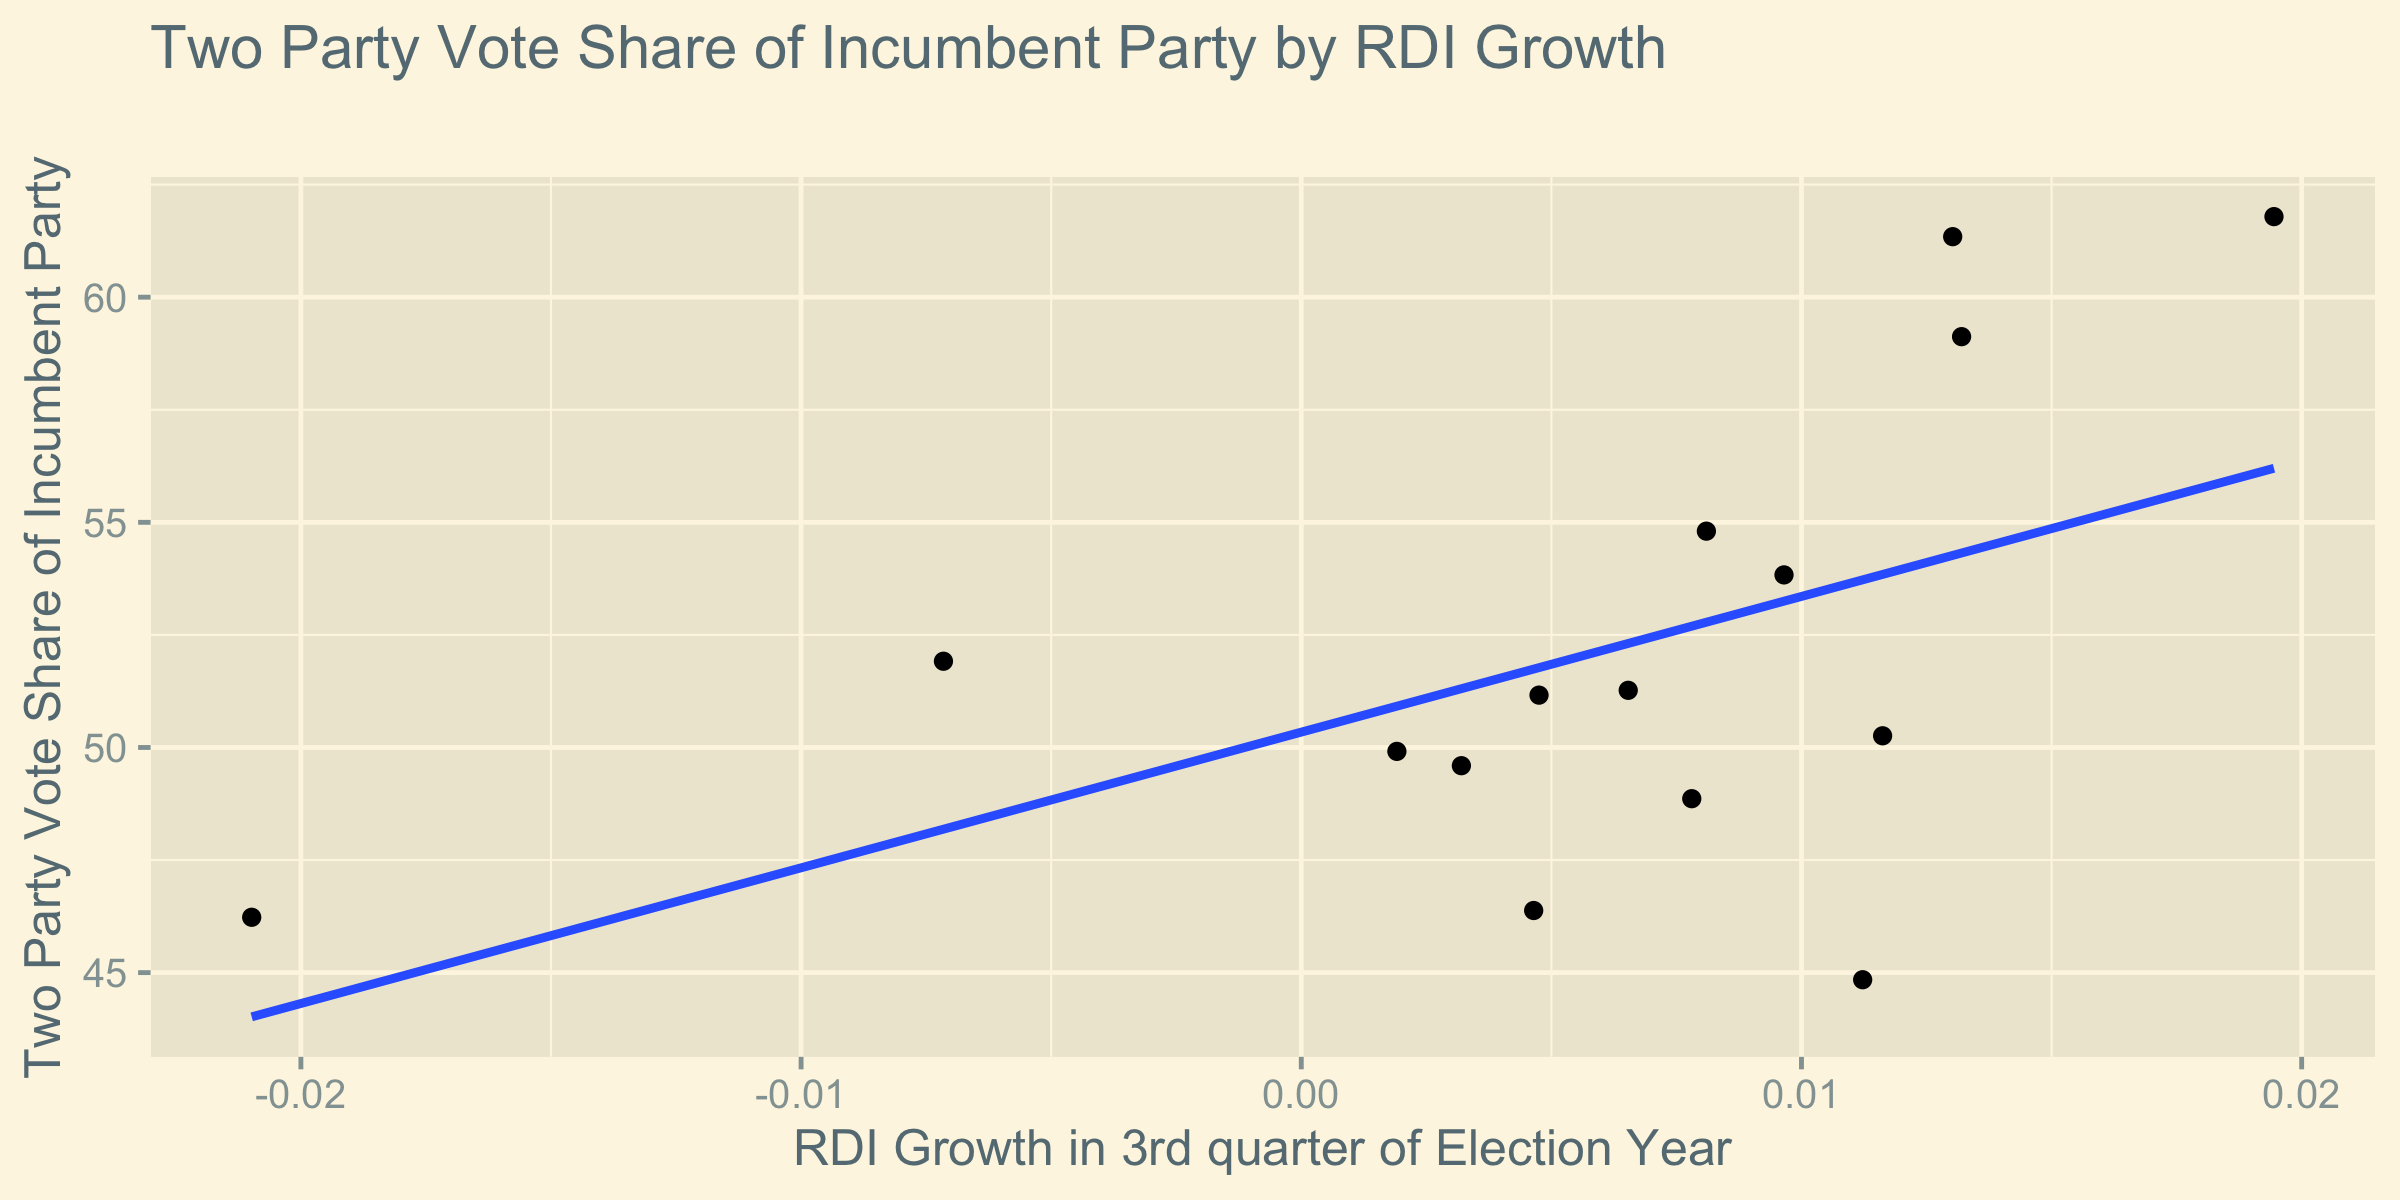 image of RDI growth vs two party vote share